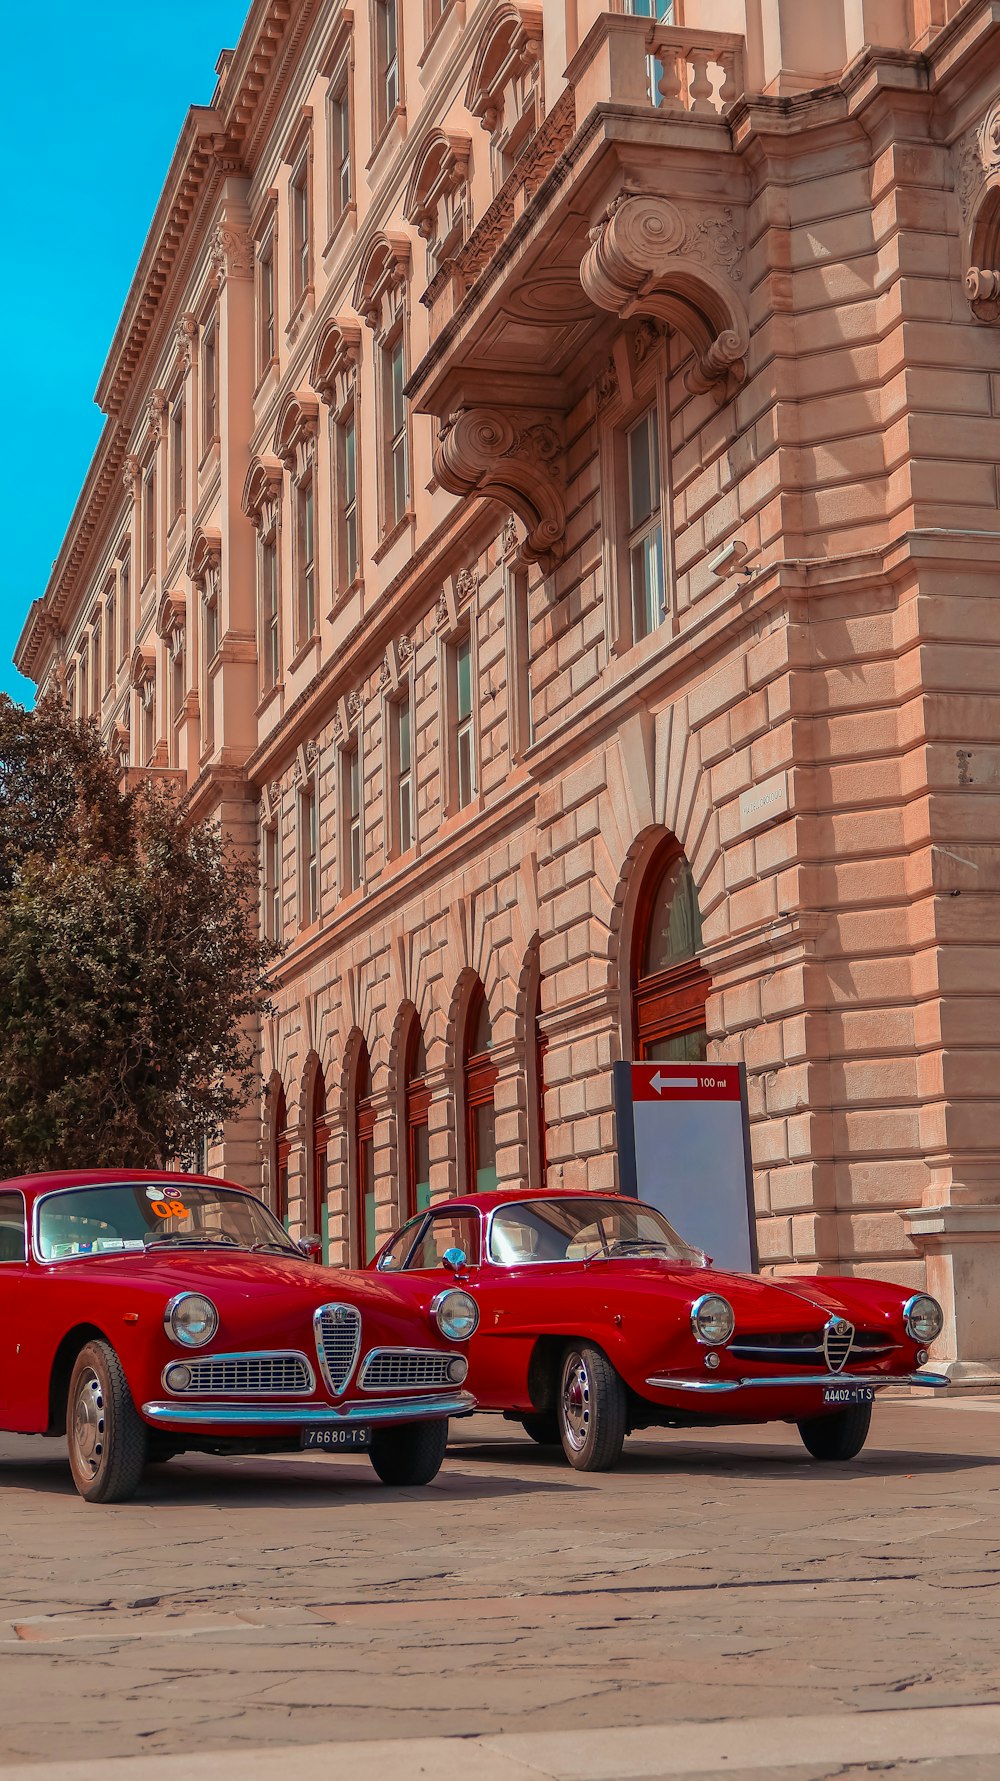 two old fashioned cars parked in front of a building